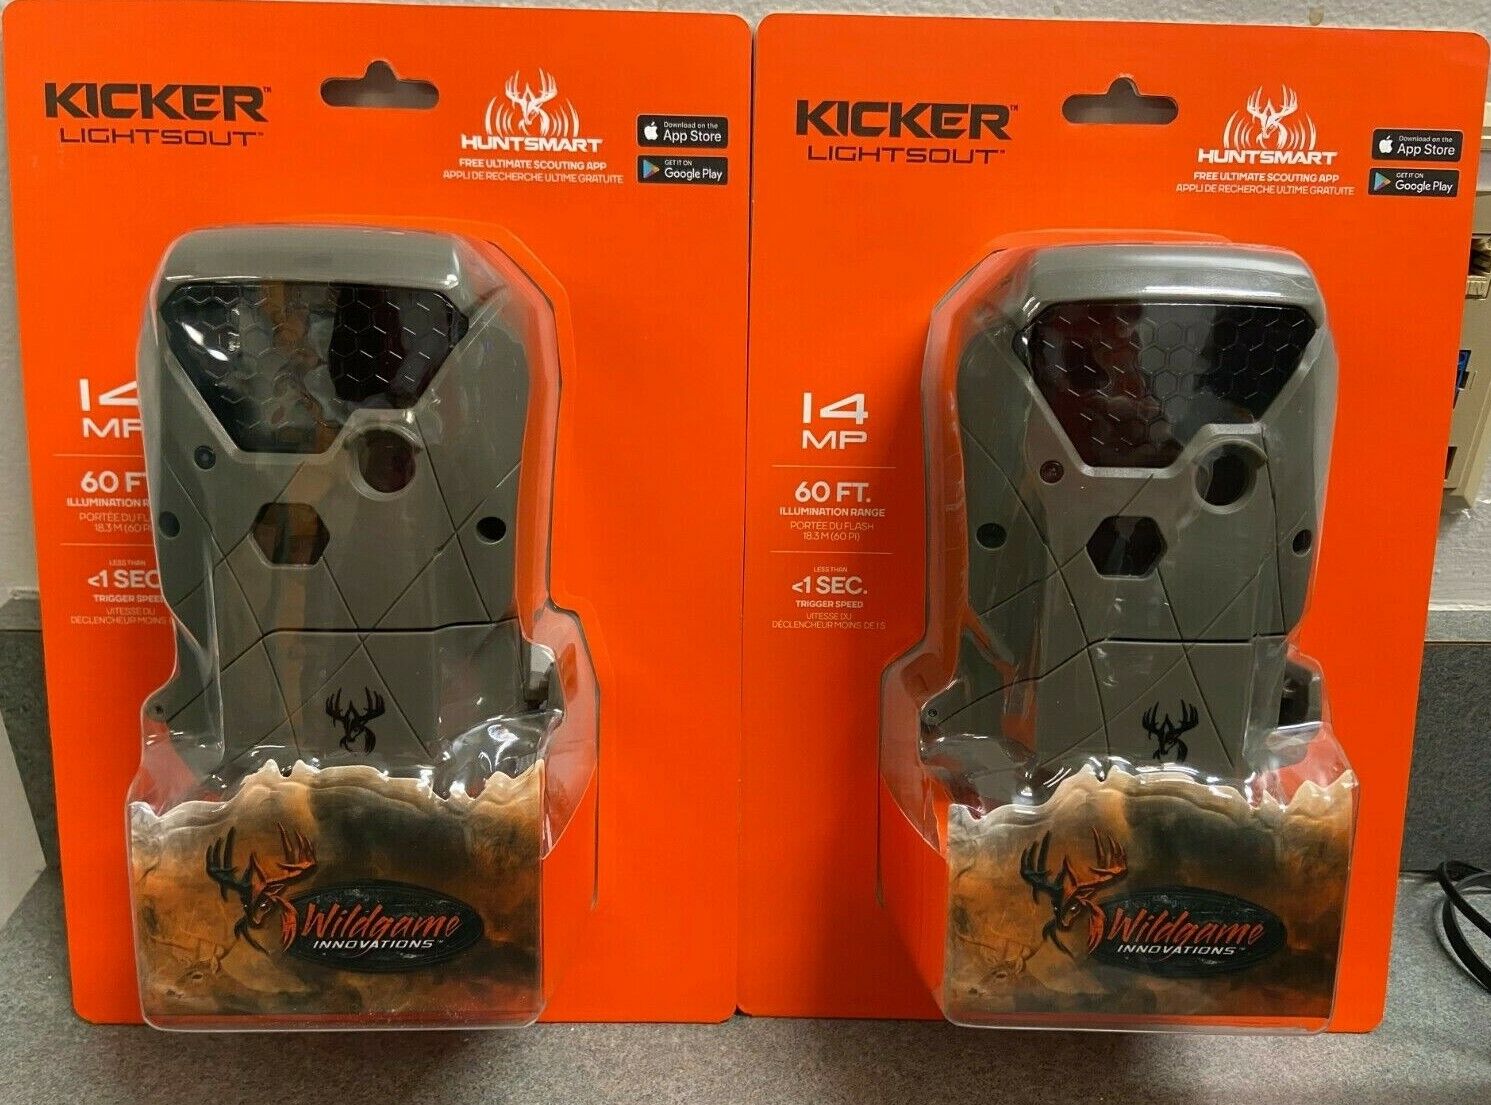 2 Pack! Wildgame Innovations Kicker Lightsout Scout Camera's 14MP #KC14B63-21 